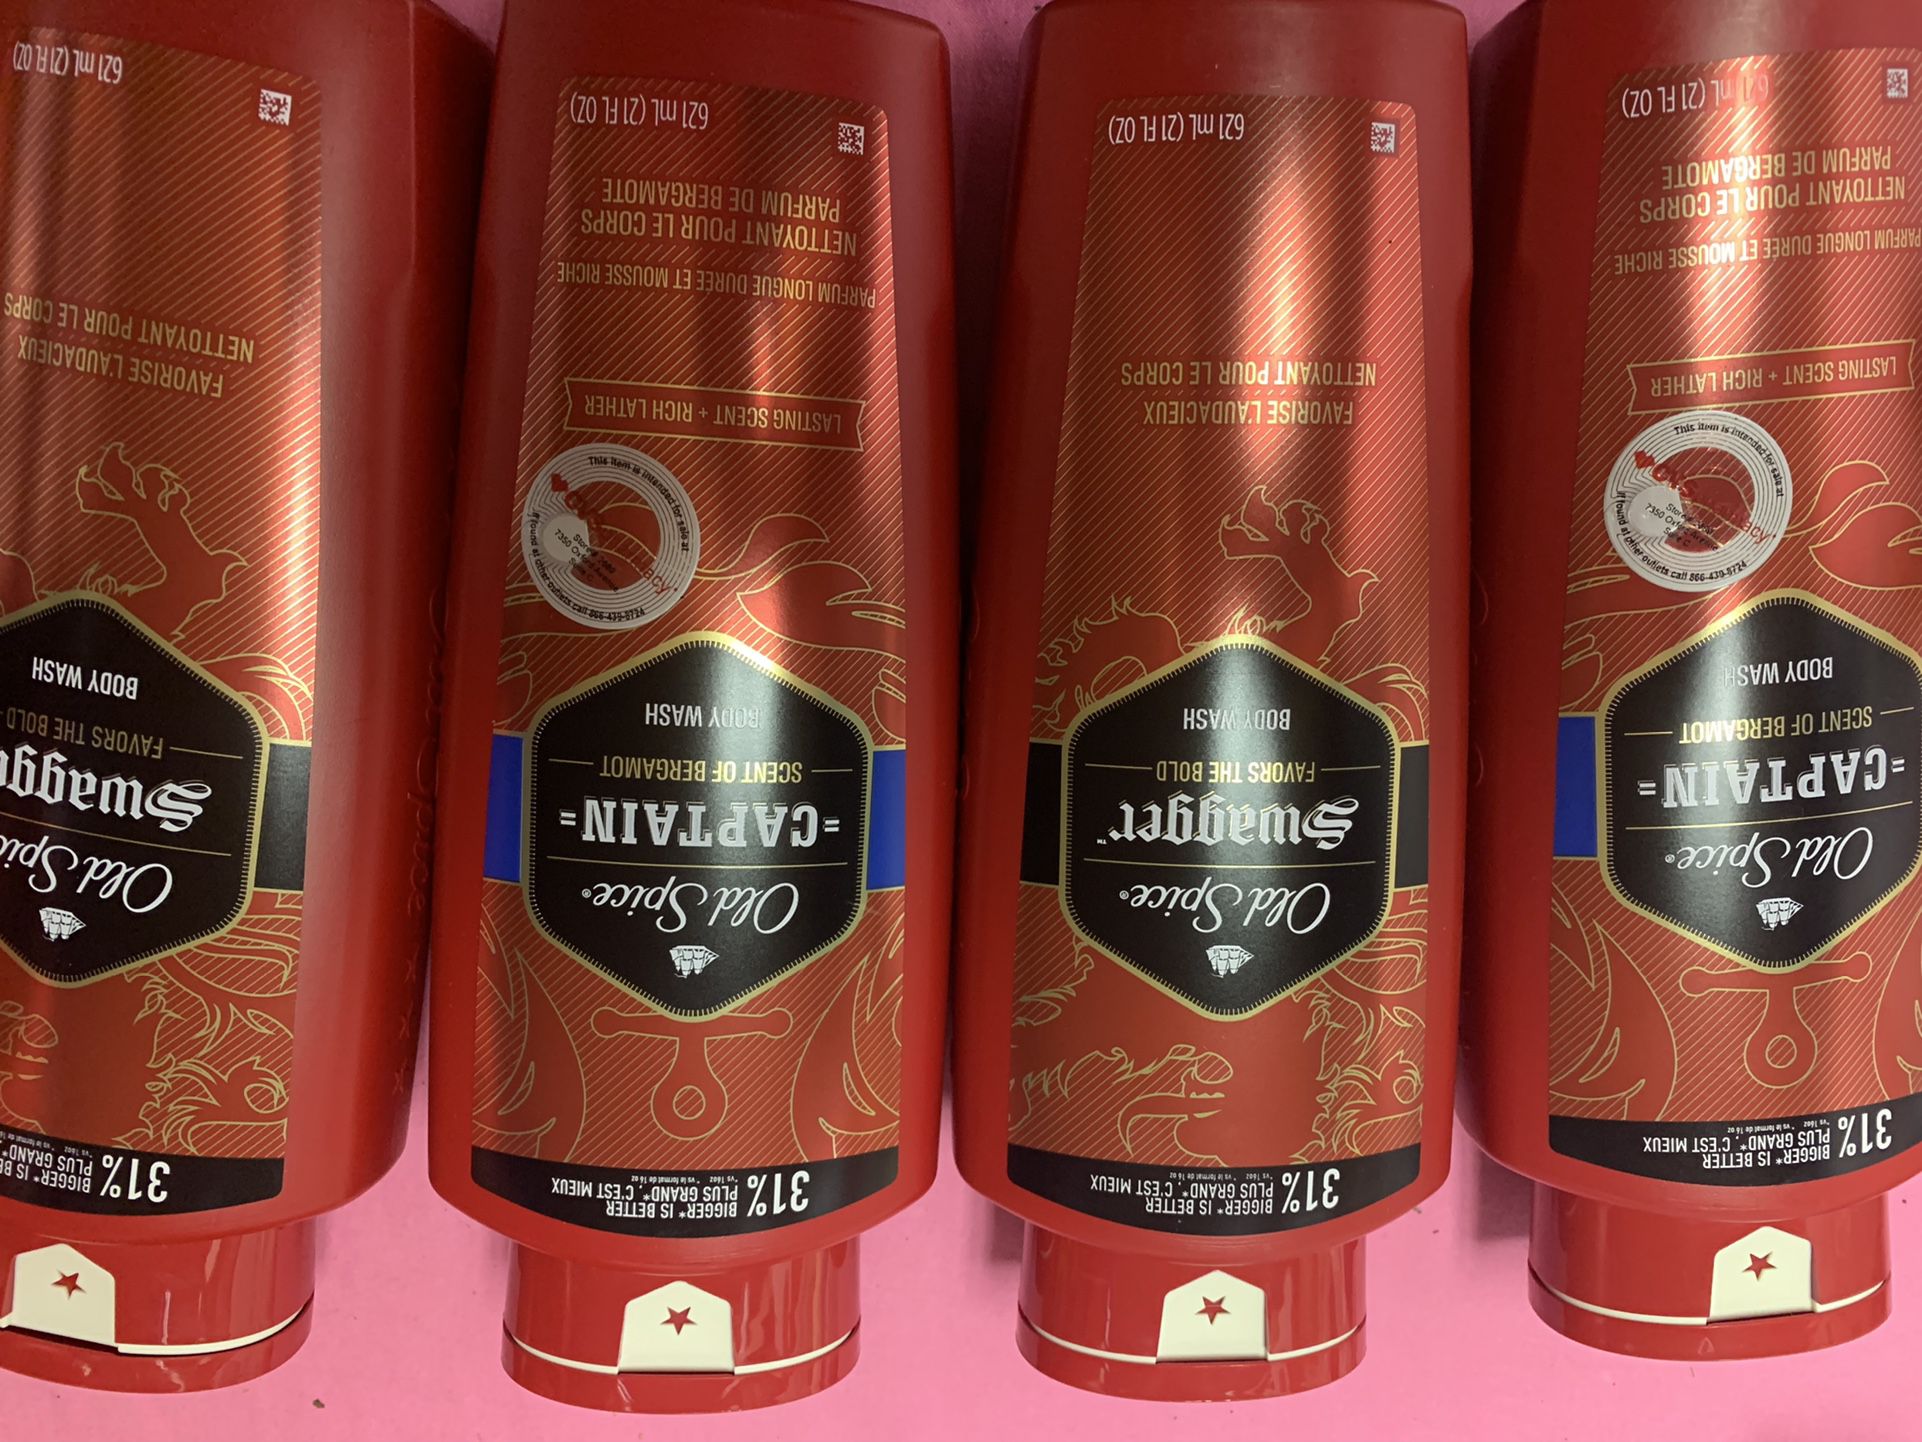 4 Old Spice Body Wash For $12